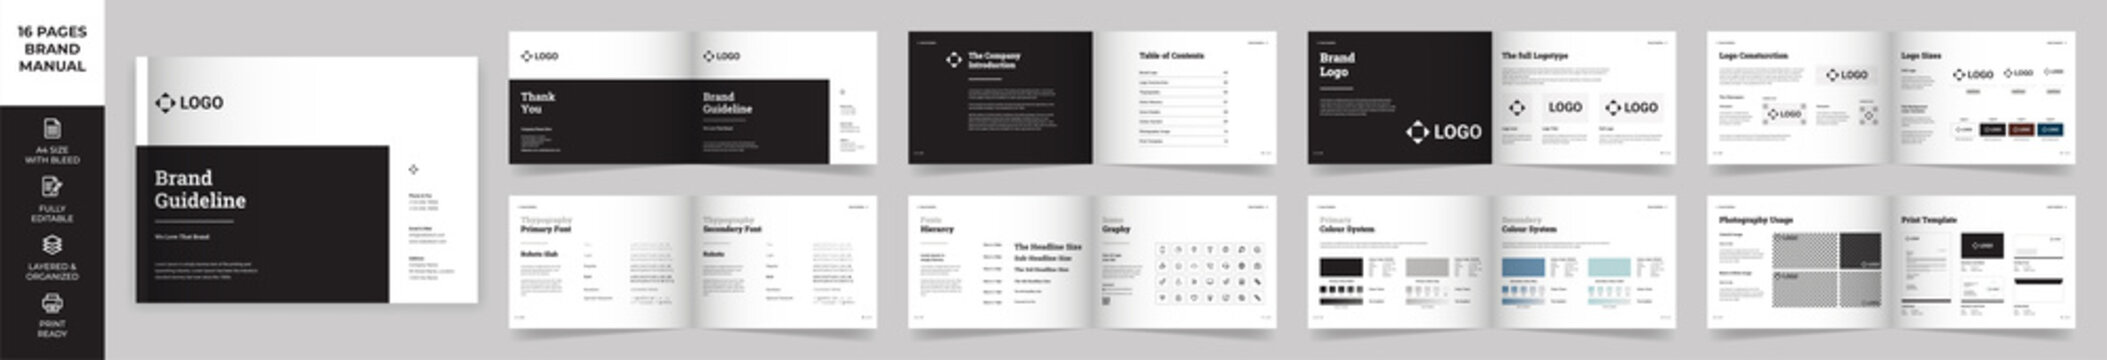 Landscape Brand Manual Template, Simple style and modern layout Brand Style , Brand Book, Brand Identity, Brand Guideline, Guide Book